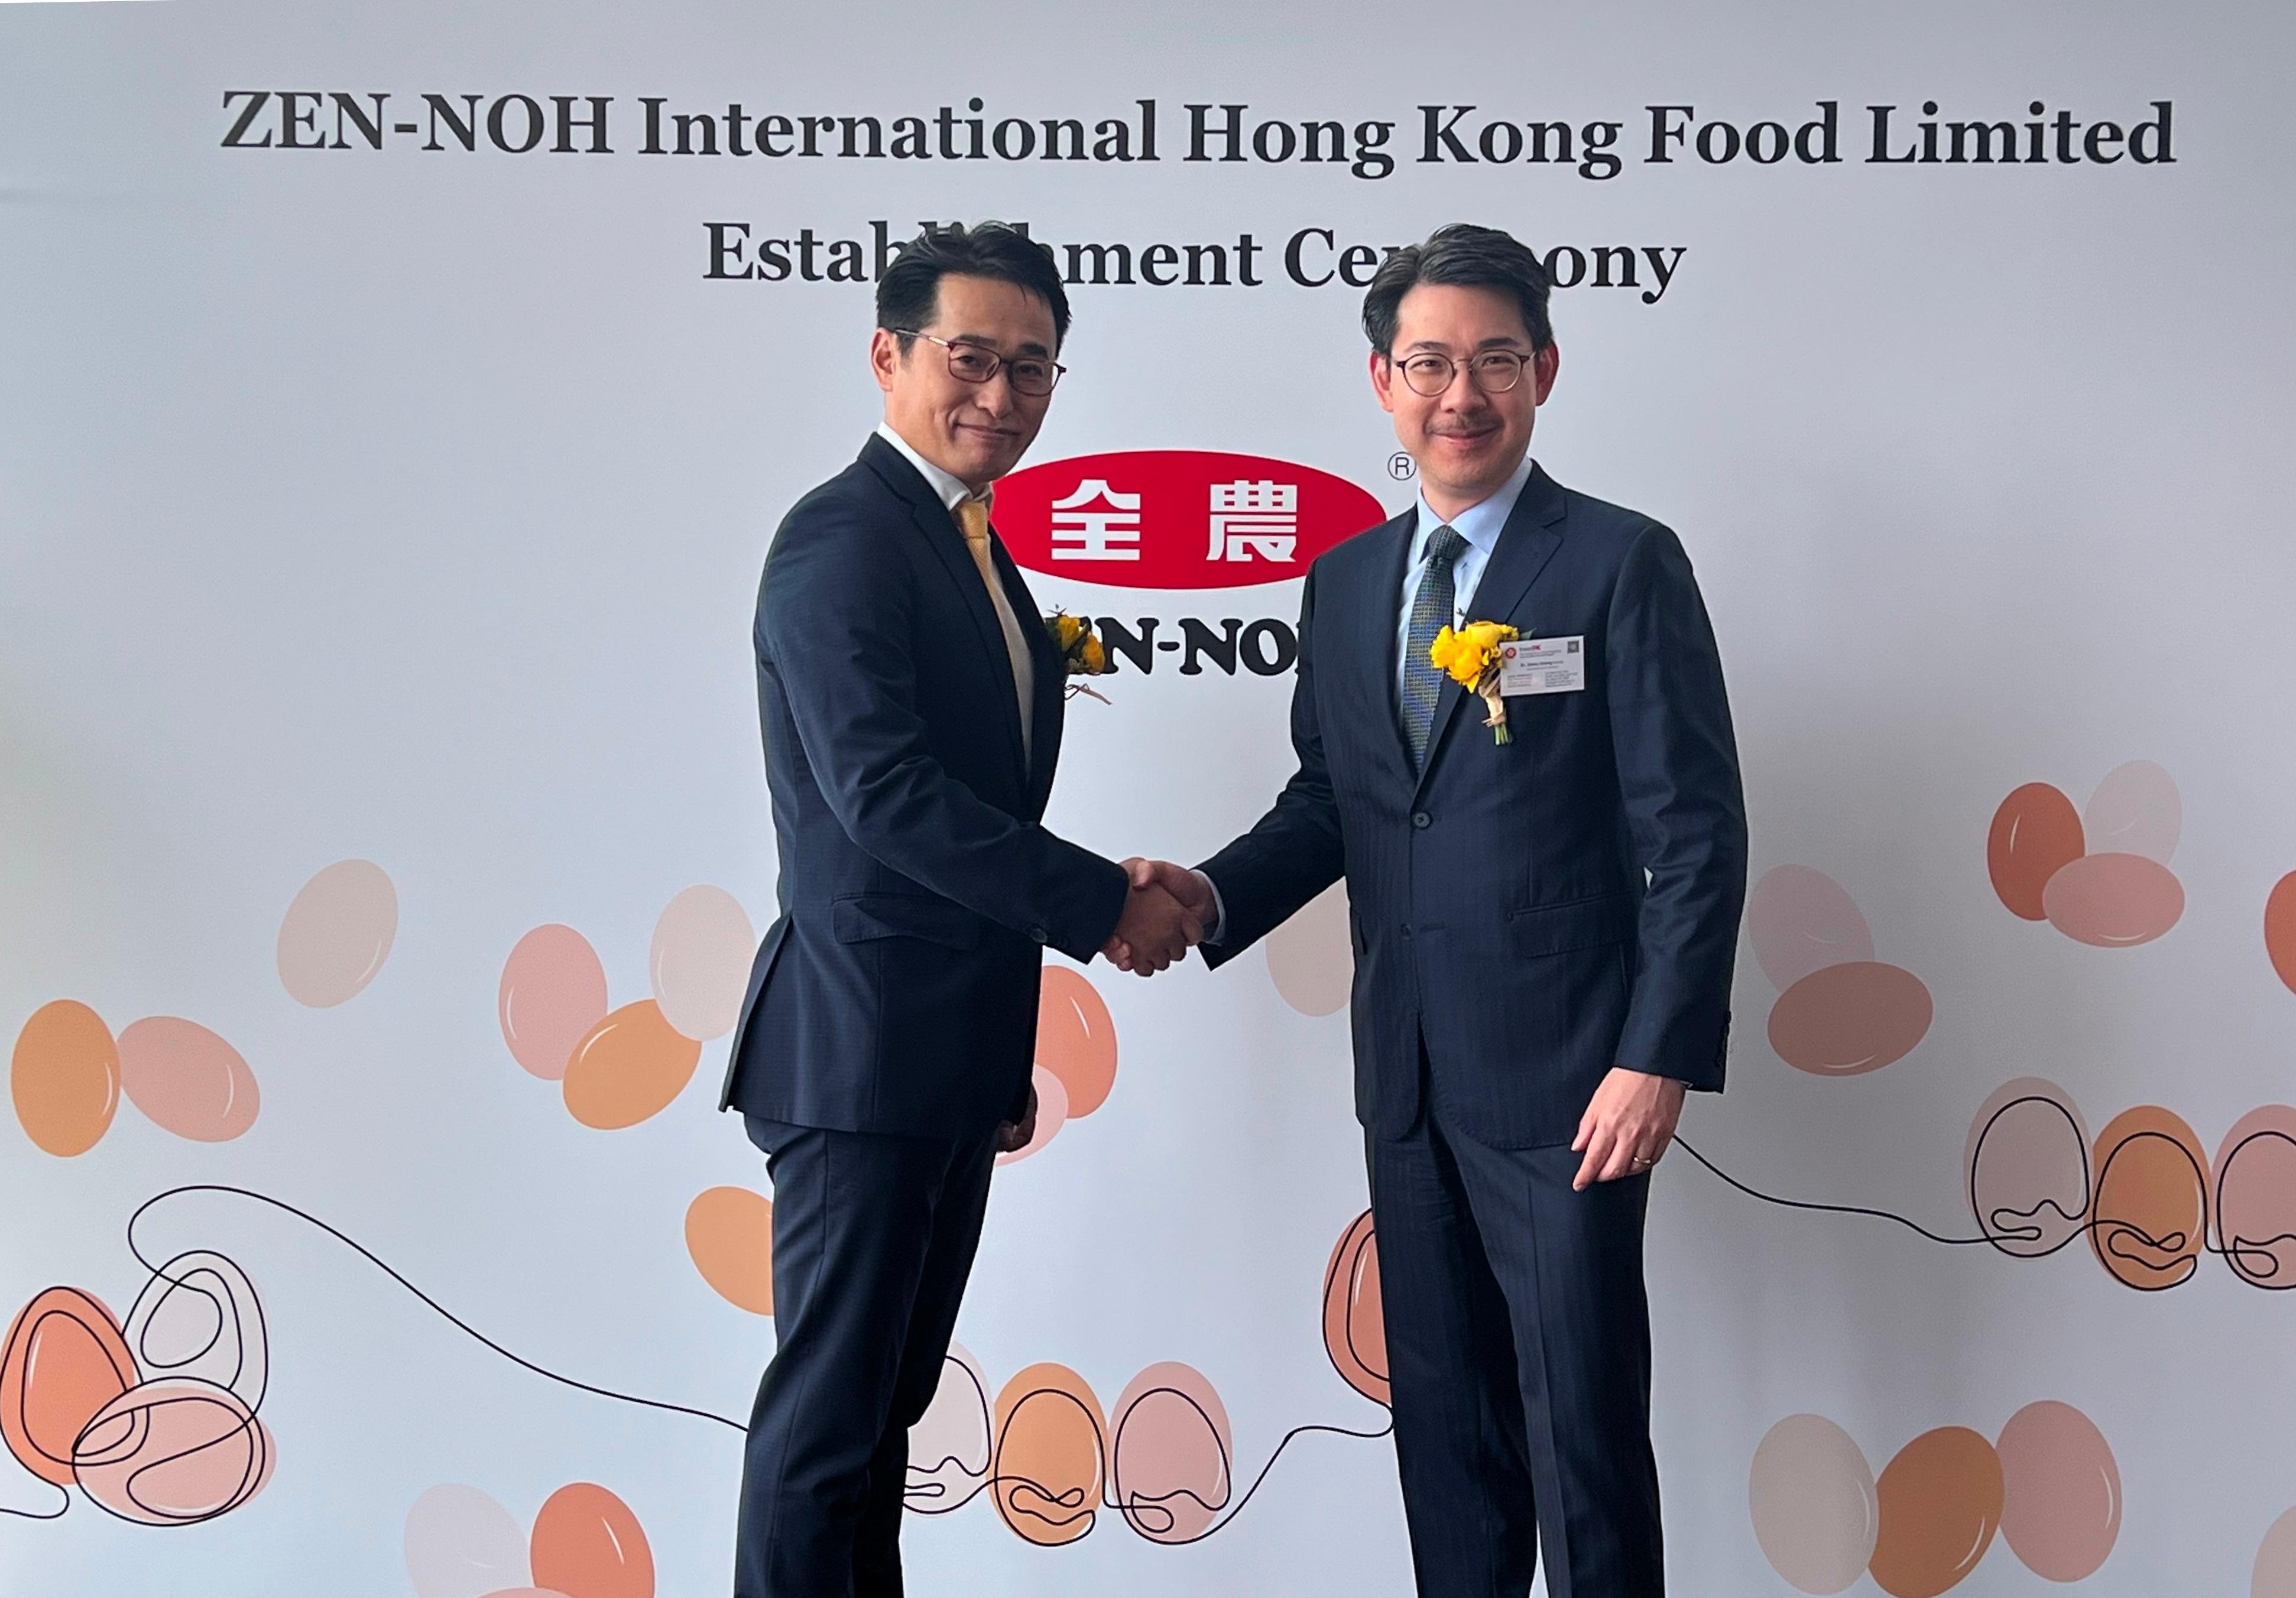 A Japanese agricultural and livestock products exporter, ZEN-NOH International Corporation, opened a food factory in Hong Kong today (March 17) that produces processed egg products to meet the growing demand for egg dishes from local sushi chains and restaurants. Photo shows the Associate Director-General of Investment Promotion, Dr Jimmy Chiang (right), and the Managing Director of ZEN-NOH International Hong Kong Food Limited, Mr Michihiro Kanetsuki, at the opening ceremony. 